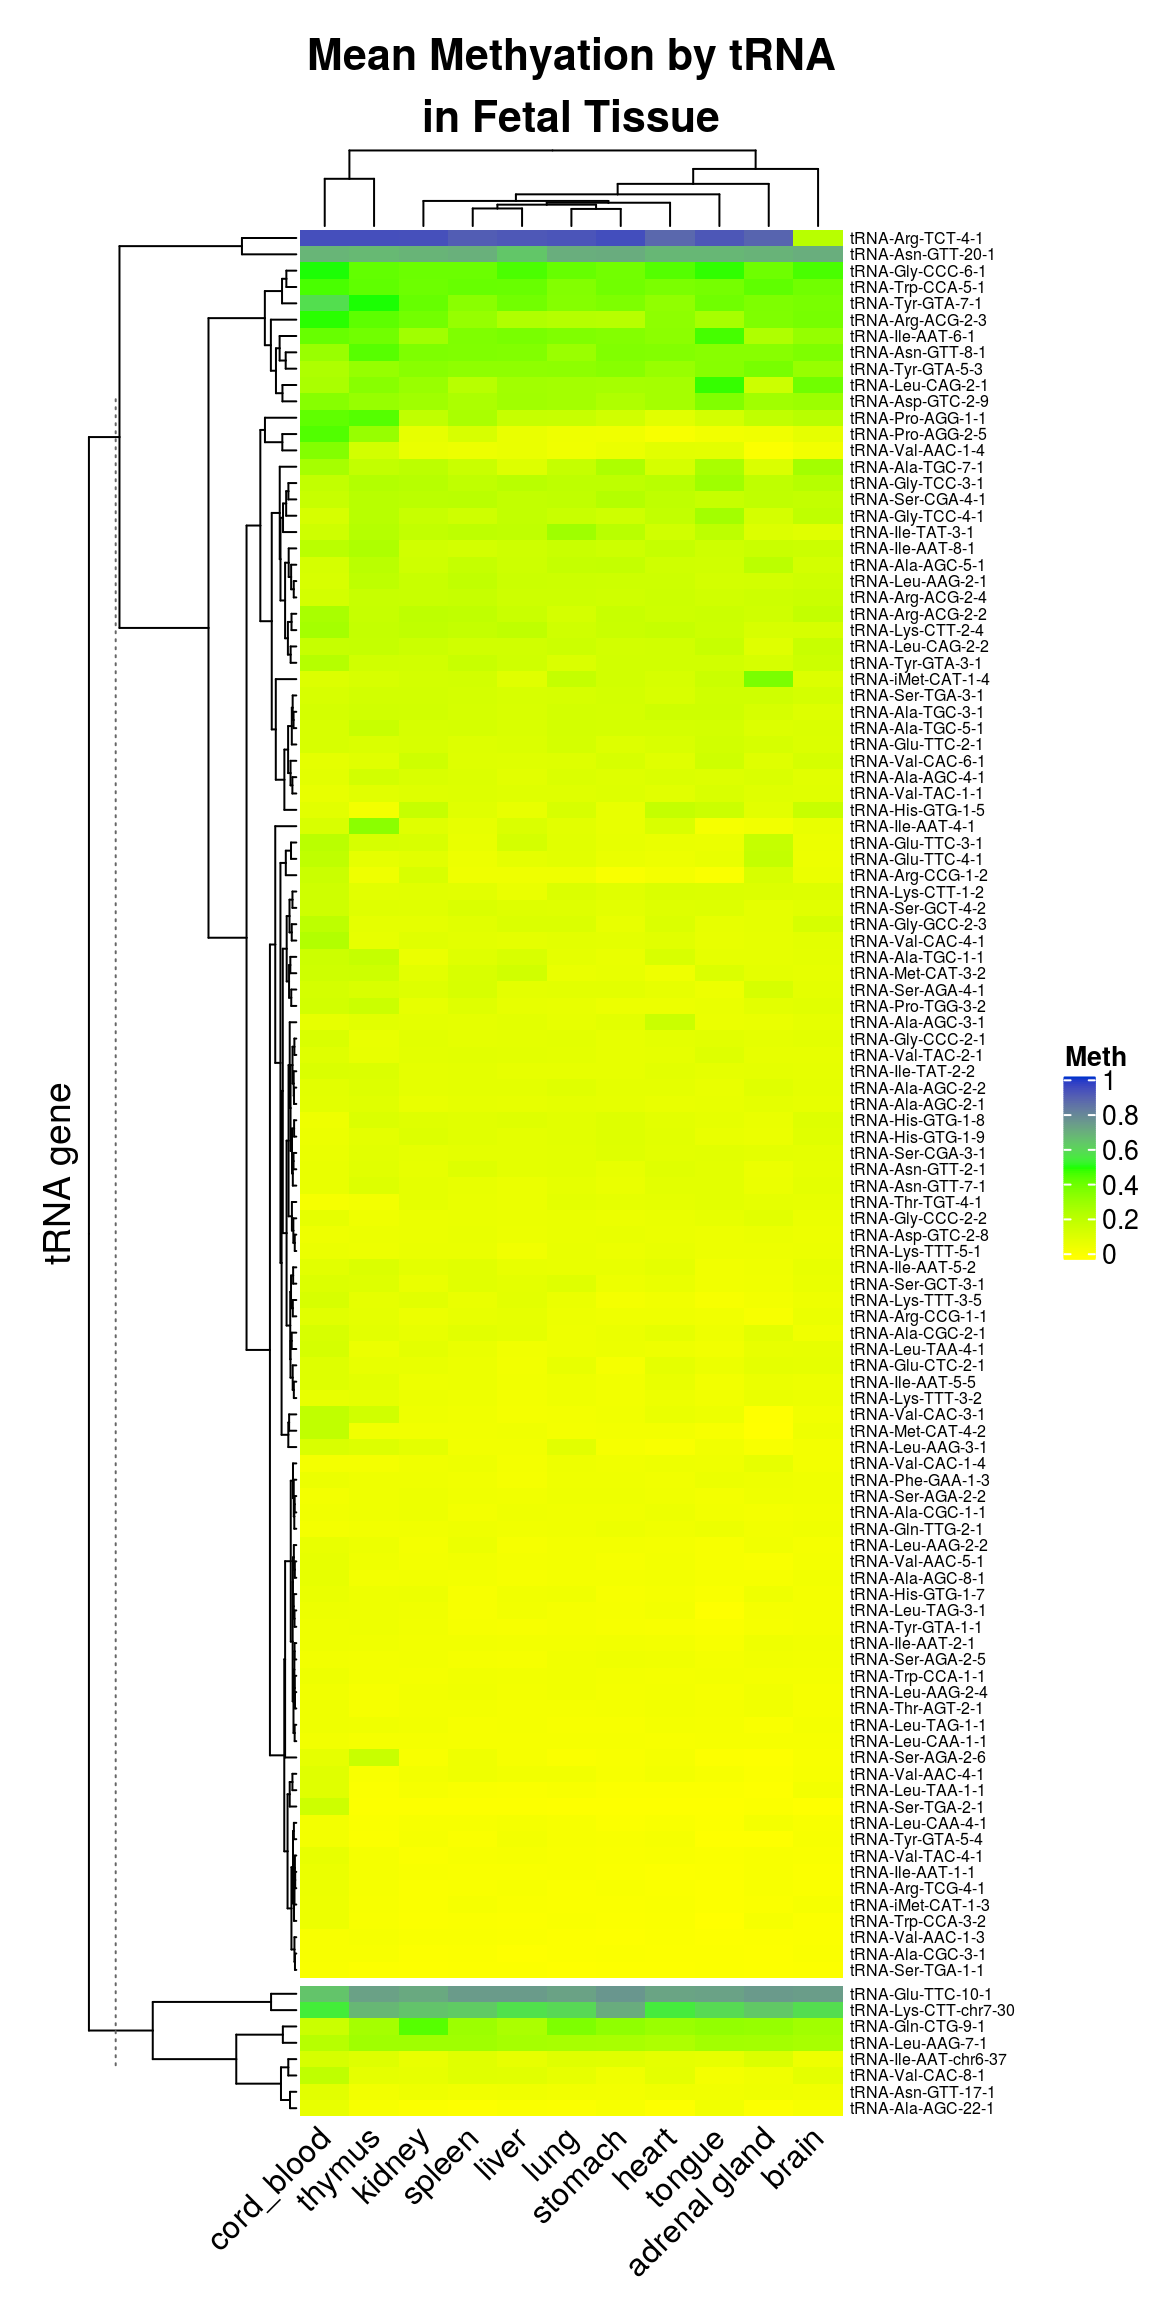 Mean Methylation of 115 tRNAs in 11 tissues. Possible pseudogenes are shown in a separate cluster beneath the main heatmap [379].